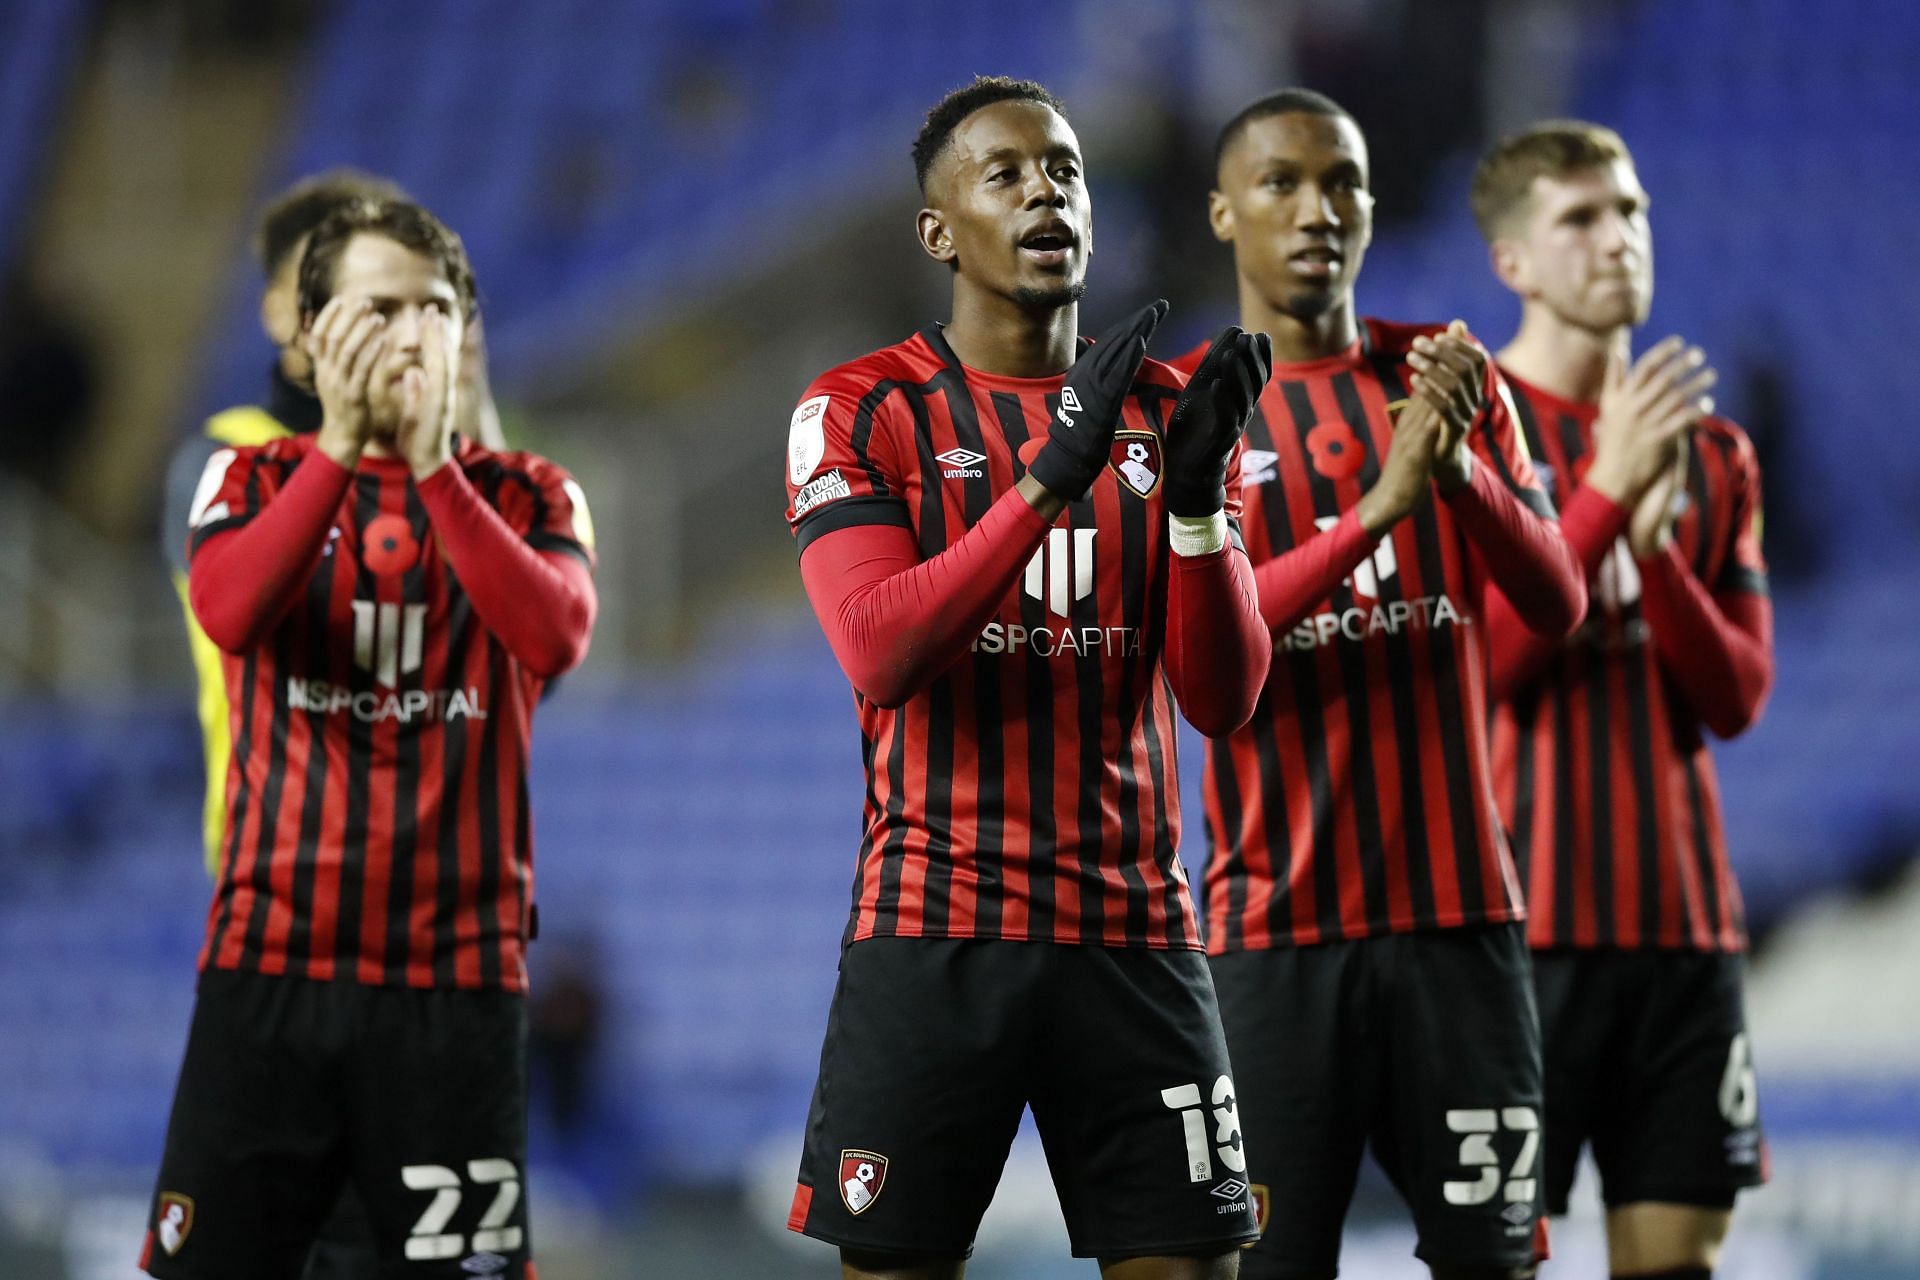 Bournemouth play host to Preston North End at the Vitality Stadium